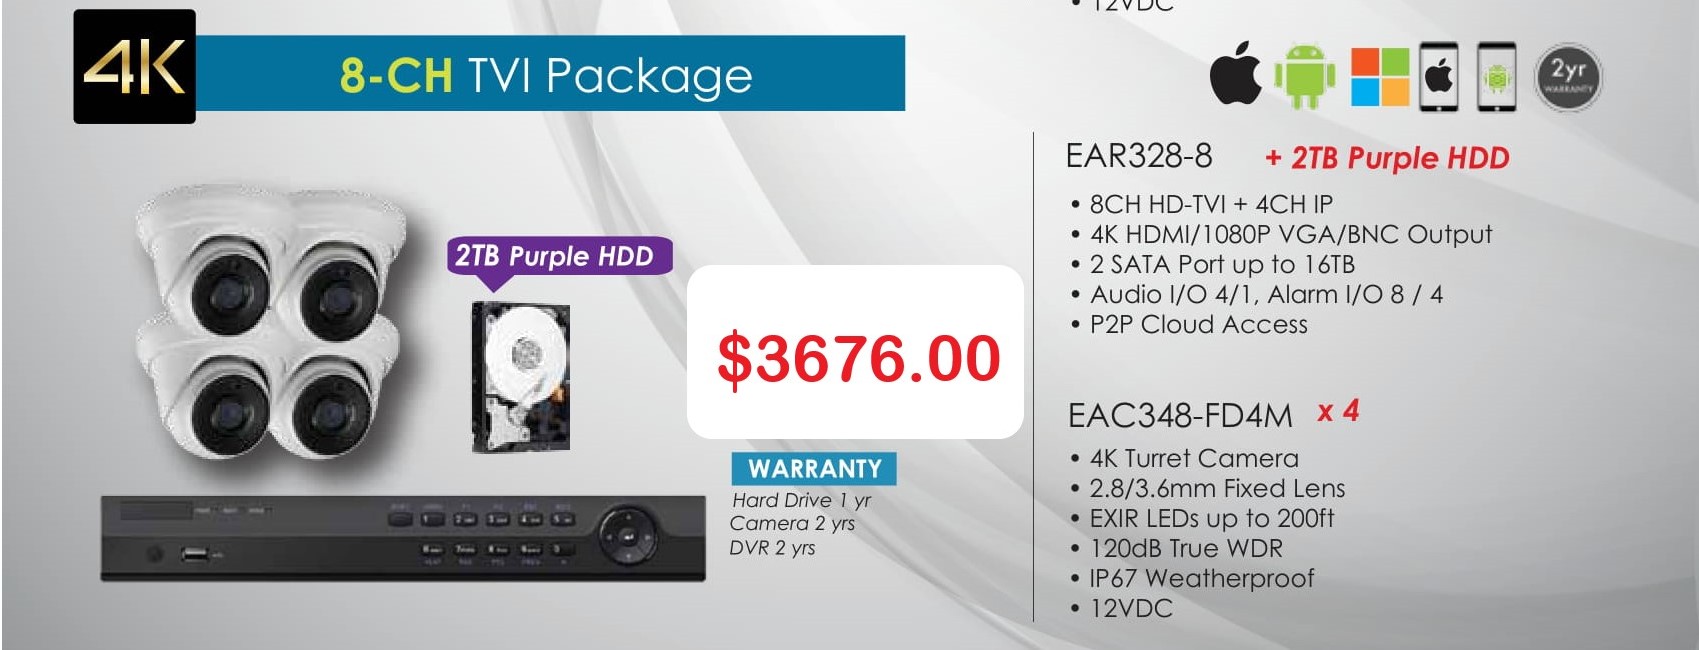 4k-8ch-pack-2 New Promo Packages